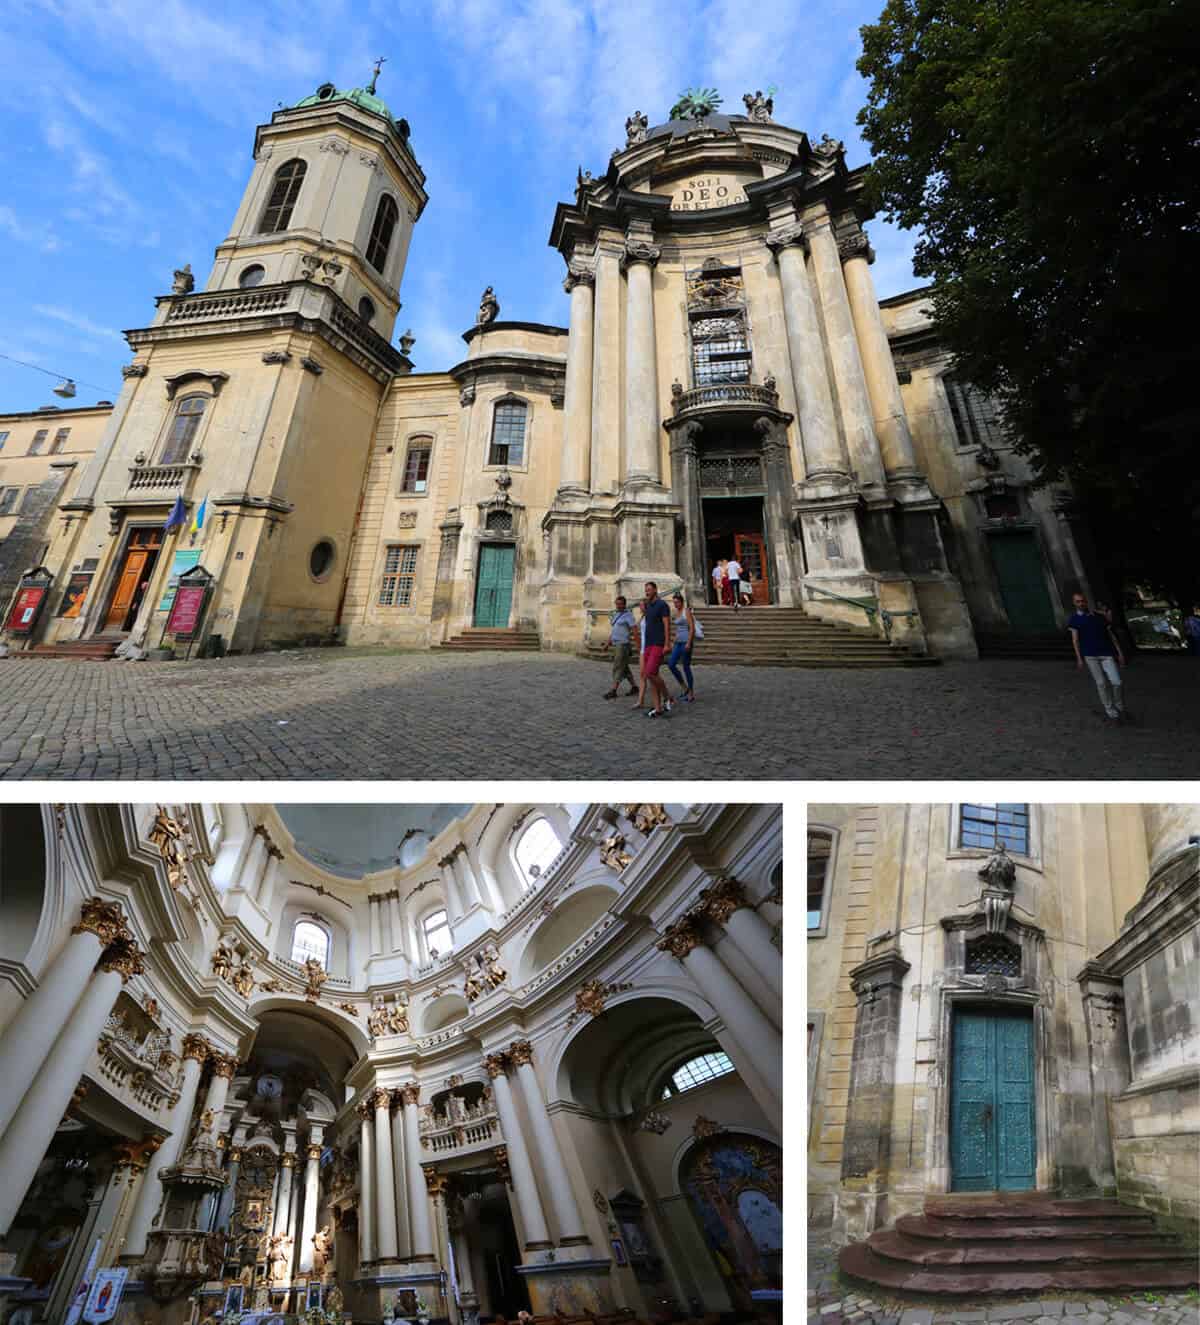 Dominican Cathedral, Lviv. The Ultimate Travel Guide to Lviv, Ukraine